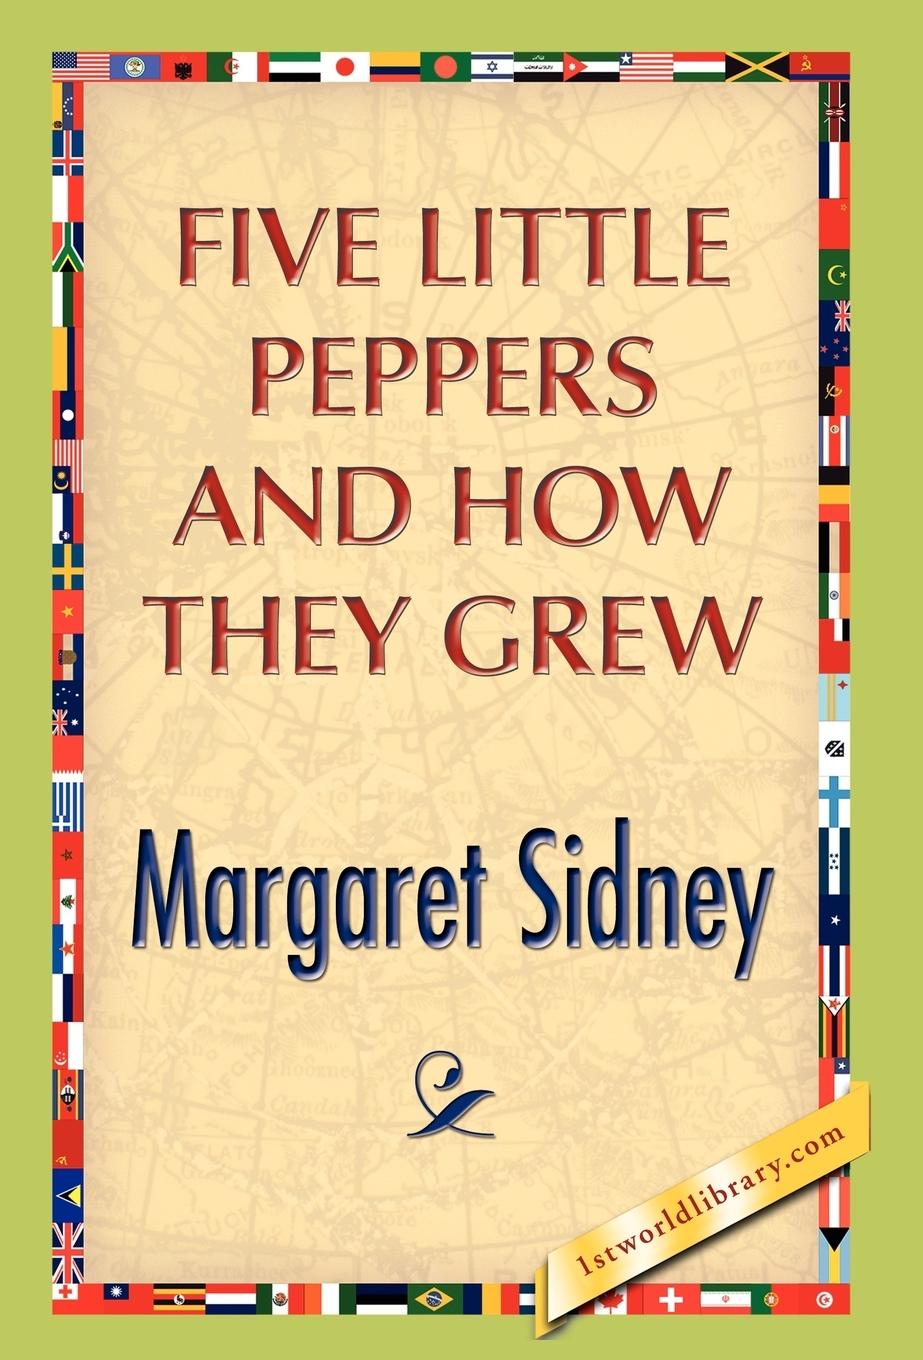 Five Little Peppers And How They Grew - Sidney, Margaret